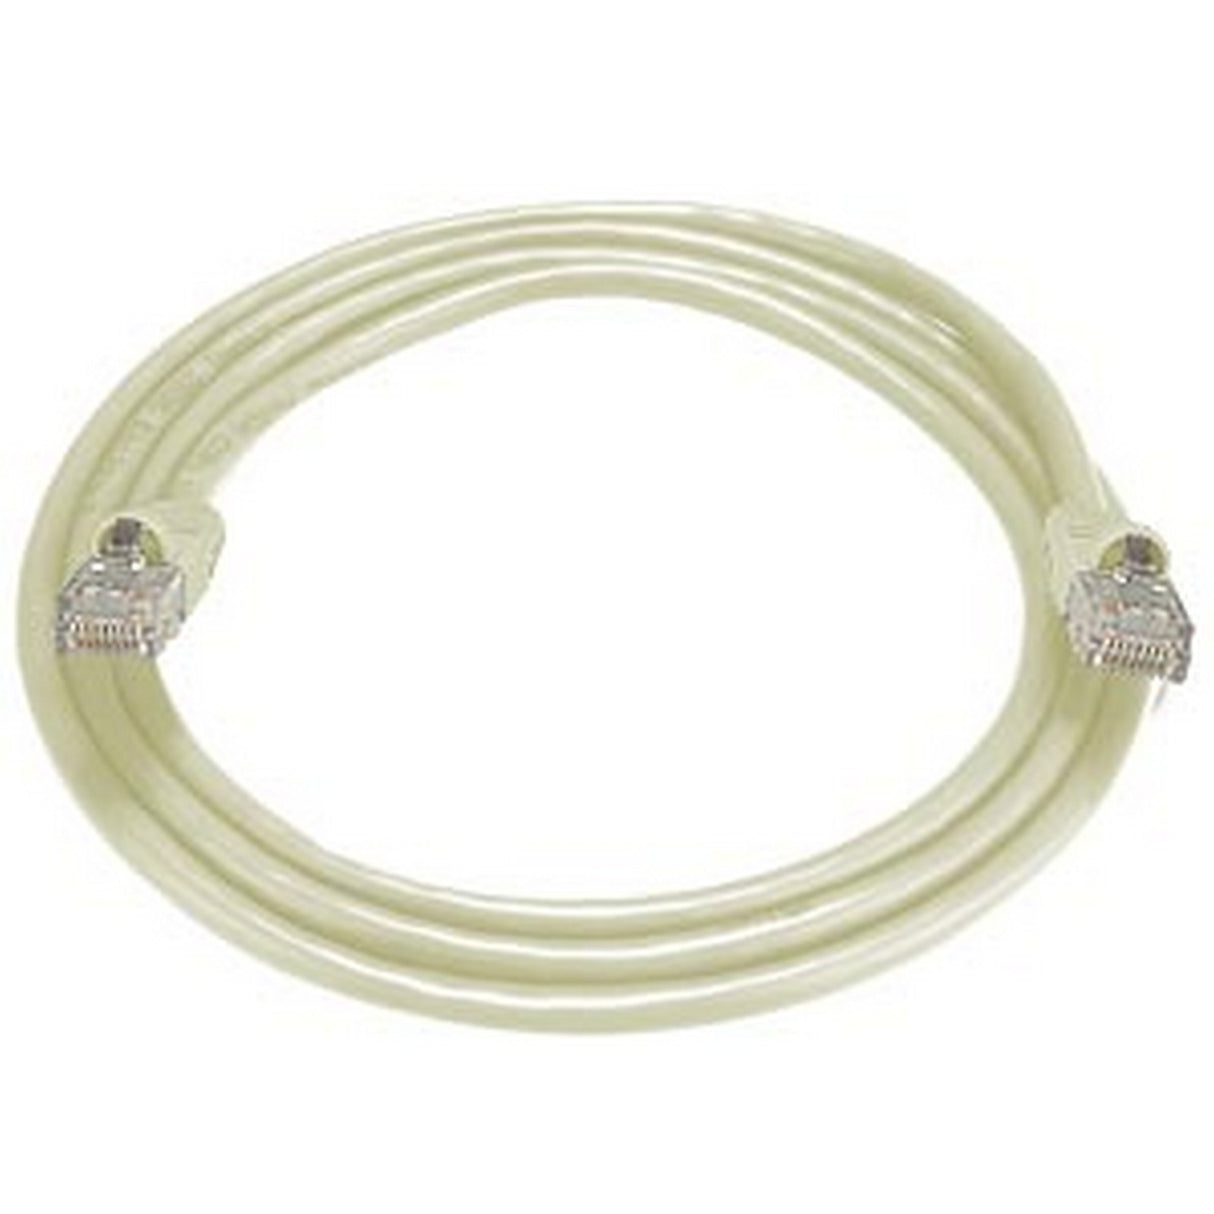 NTI CAT5-10-GRAY CAT5 Cable, Male to Male, Gray, 10-Foot